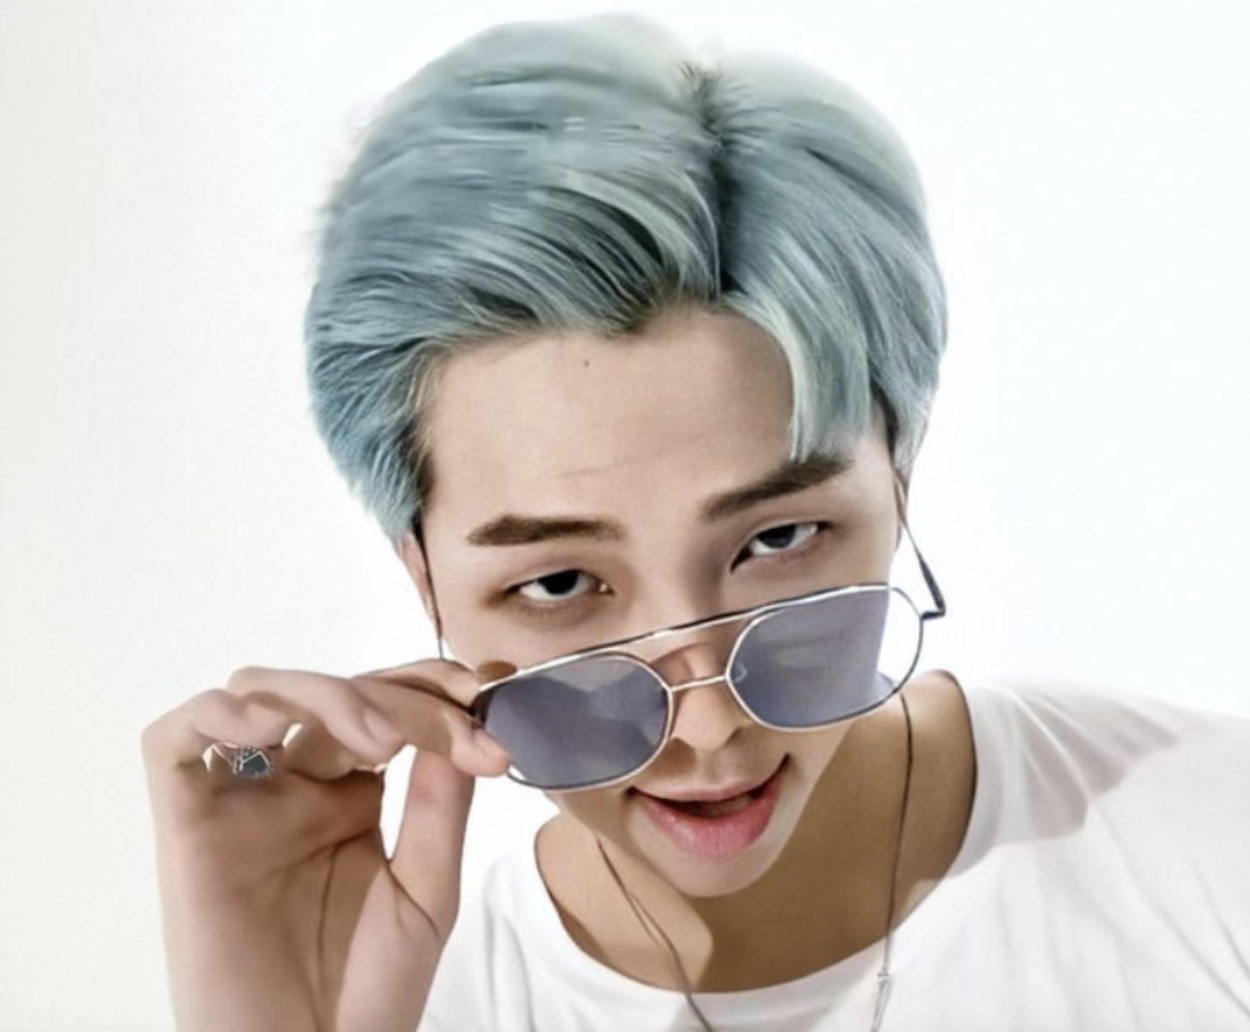 BTS RM's Blue Hair Evolution: From "No More Dream" to "Butter" - wide 7